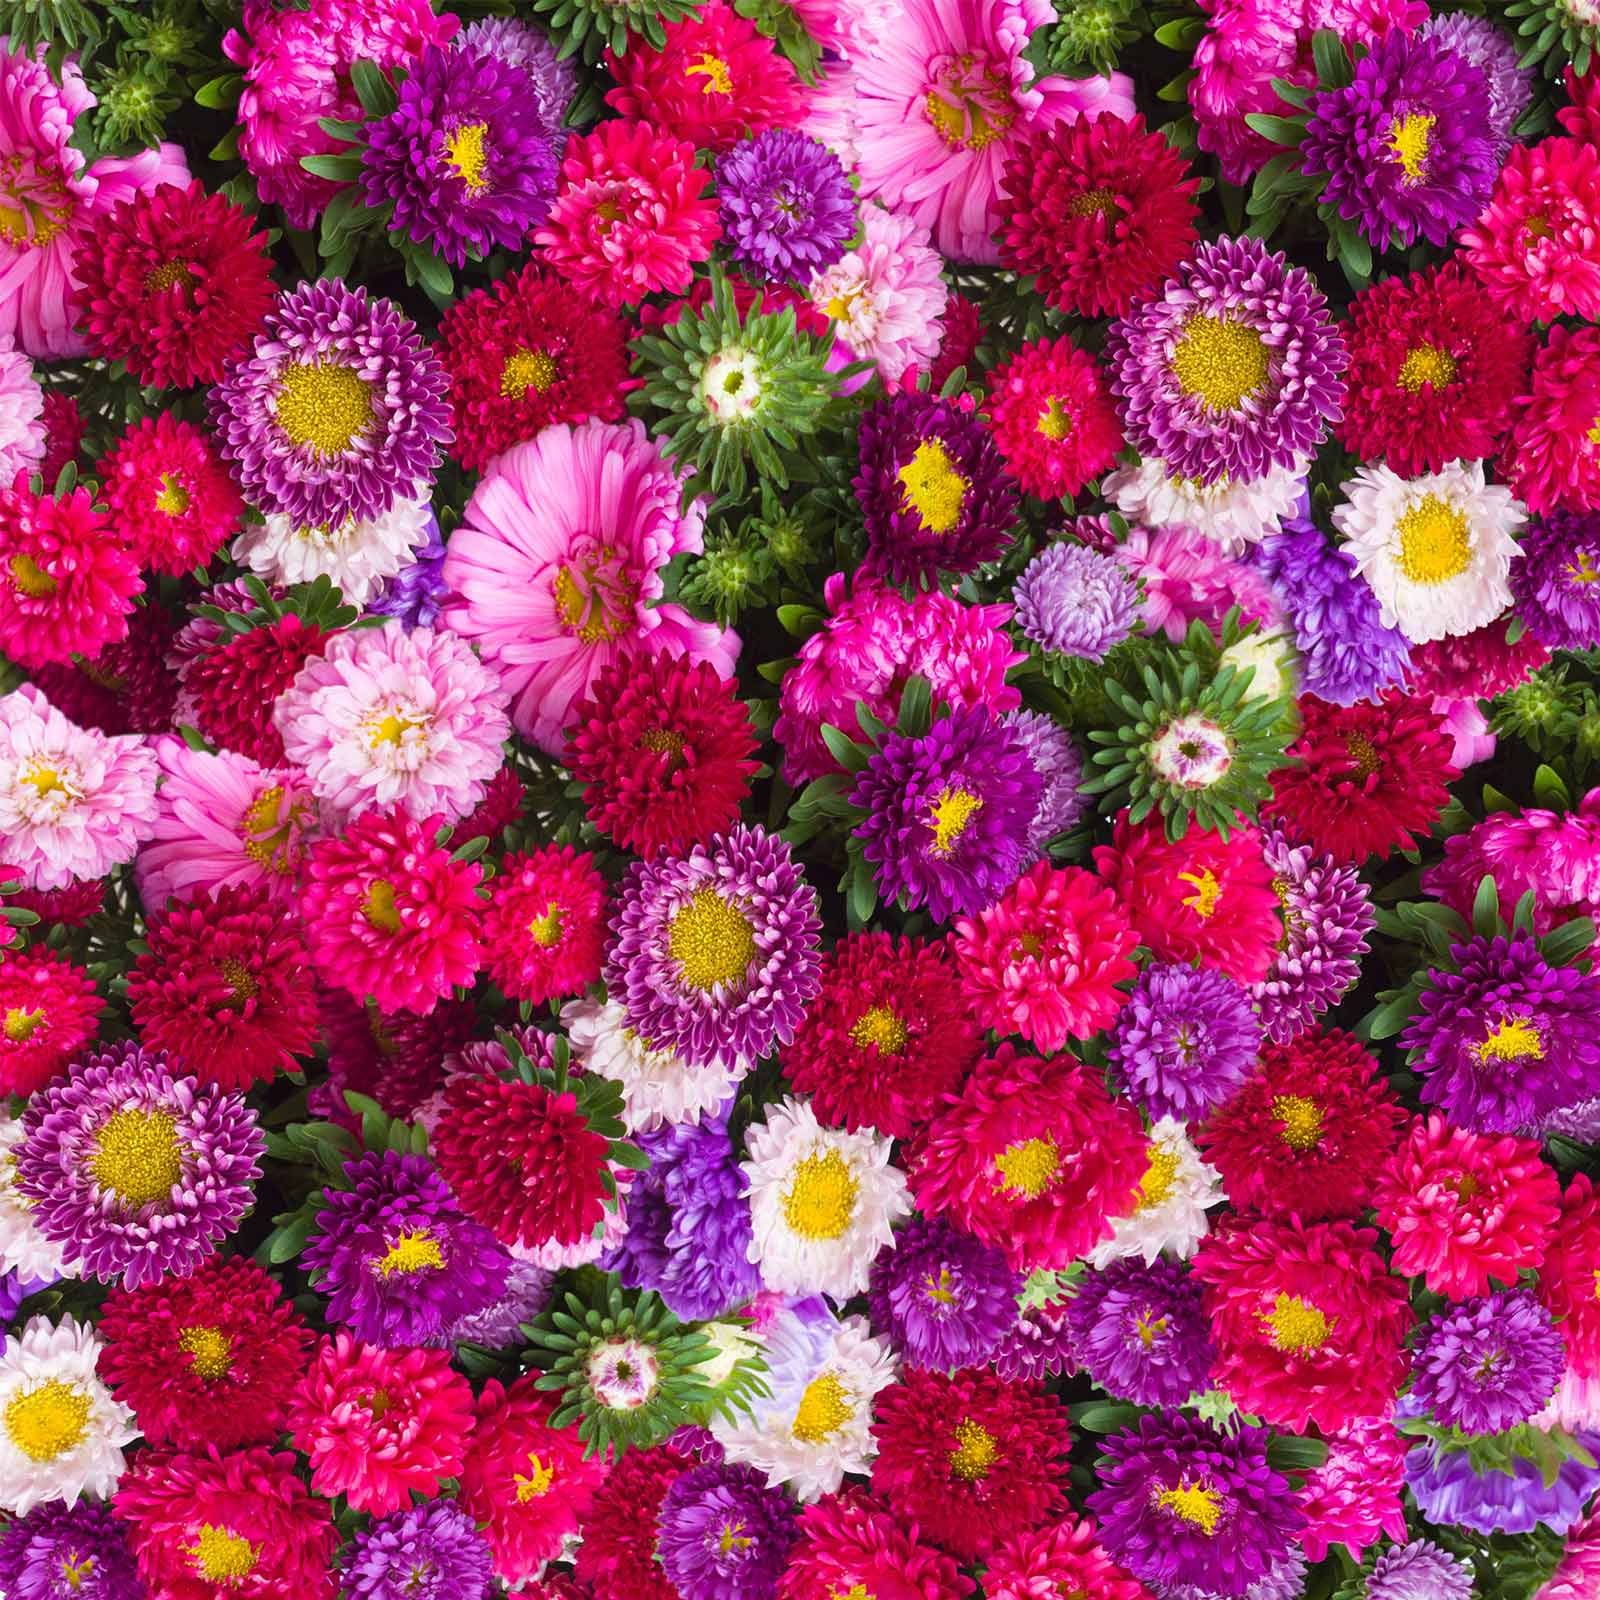 China ASTERS Flower SEEDS 25 Fresh seeds ready to plant in your garden